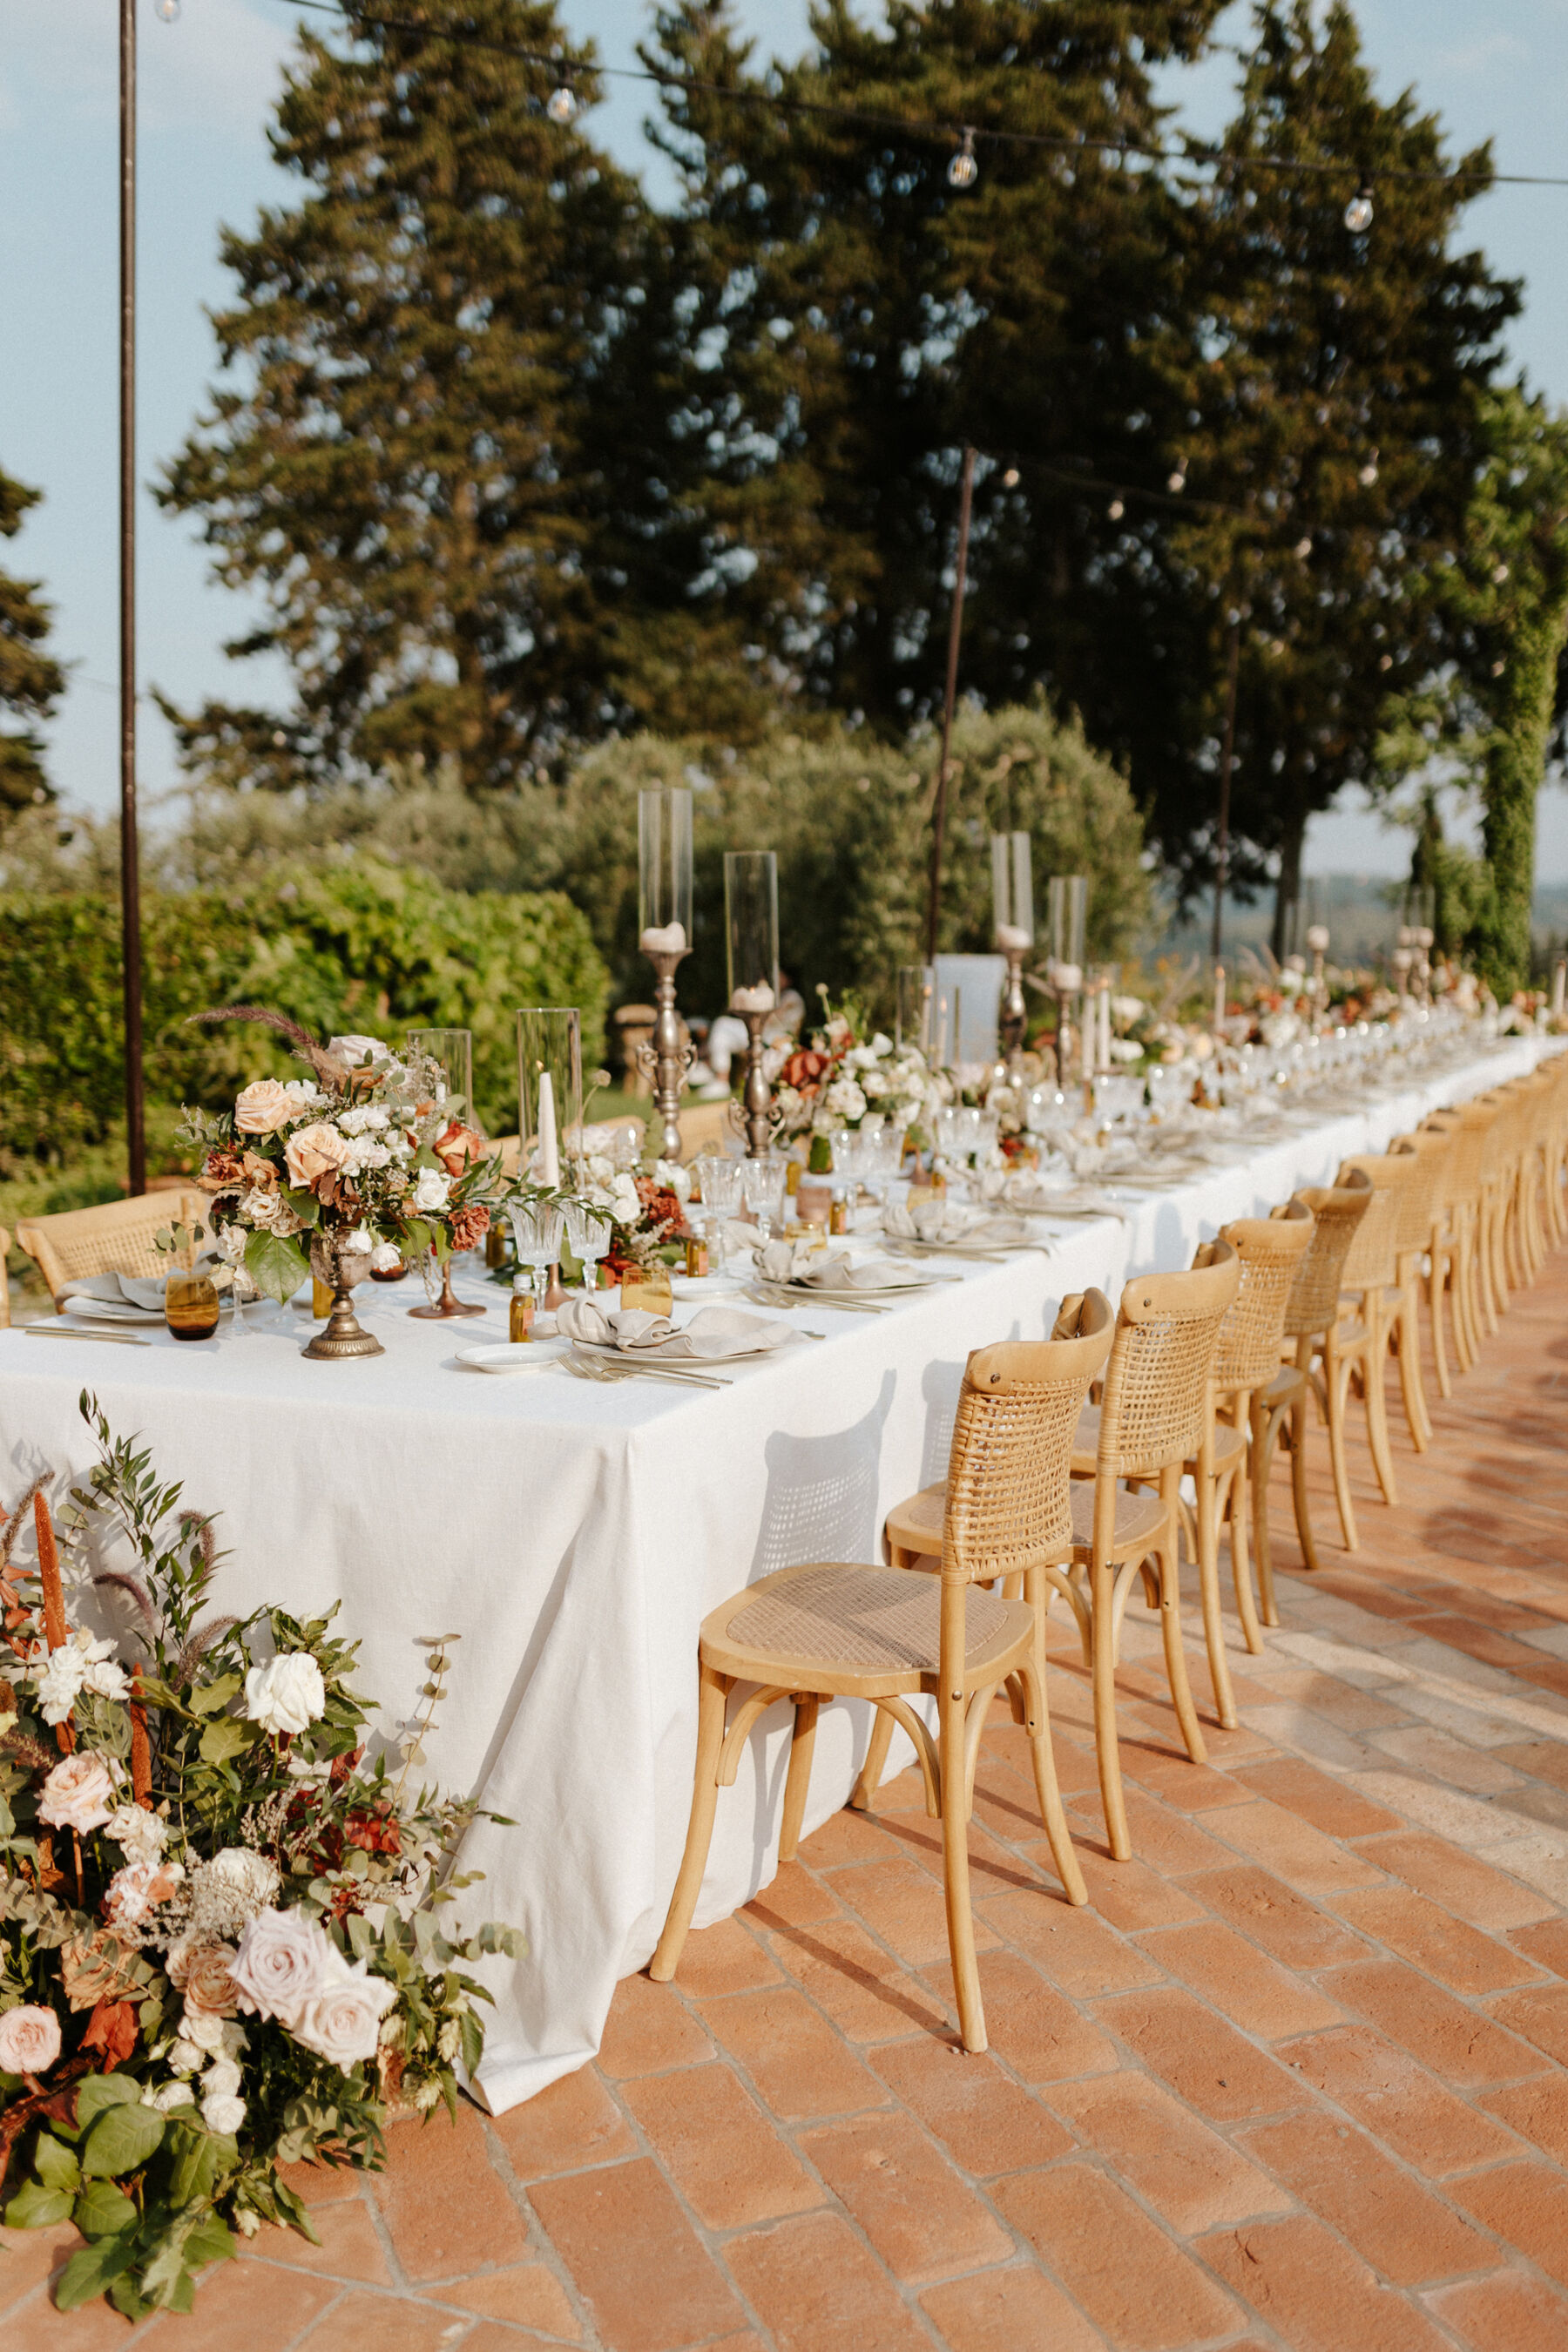 Outdoor wedding reception table setup - wedding in Italy. Wooden chairs surrounding a long table that has colourful summer floral decor in the centre and crisp white table cloths. 